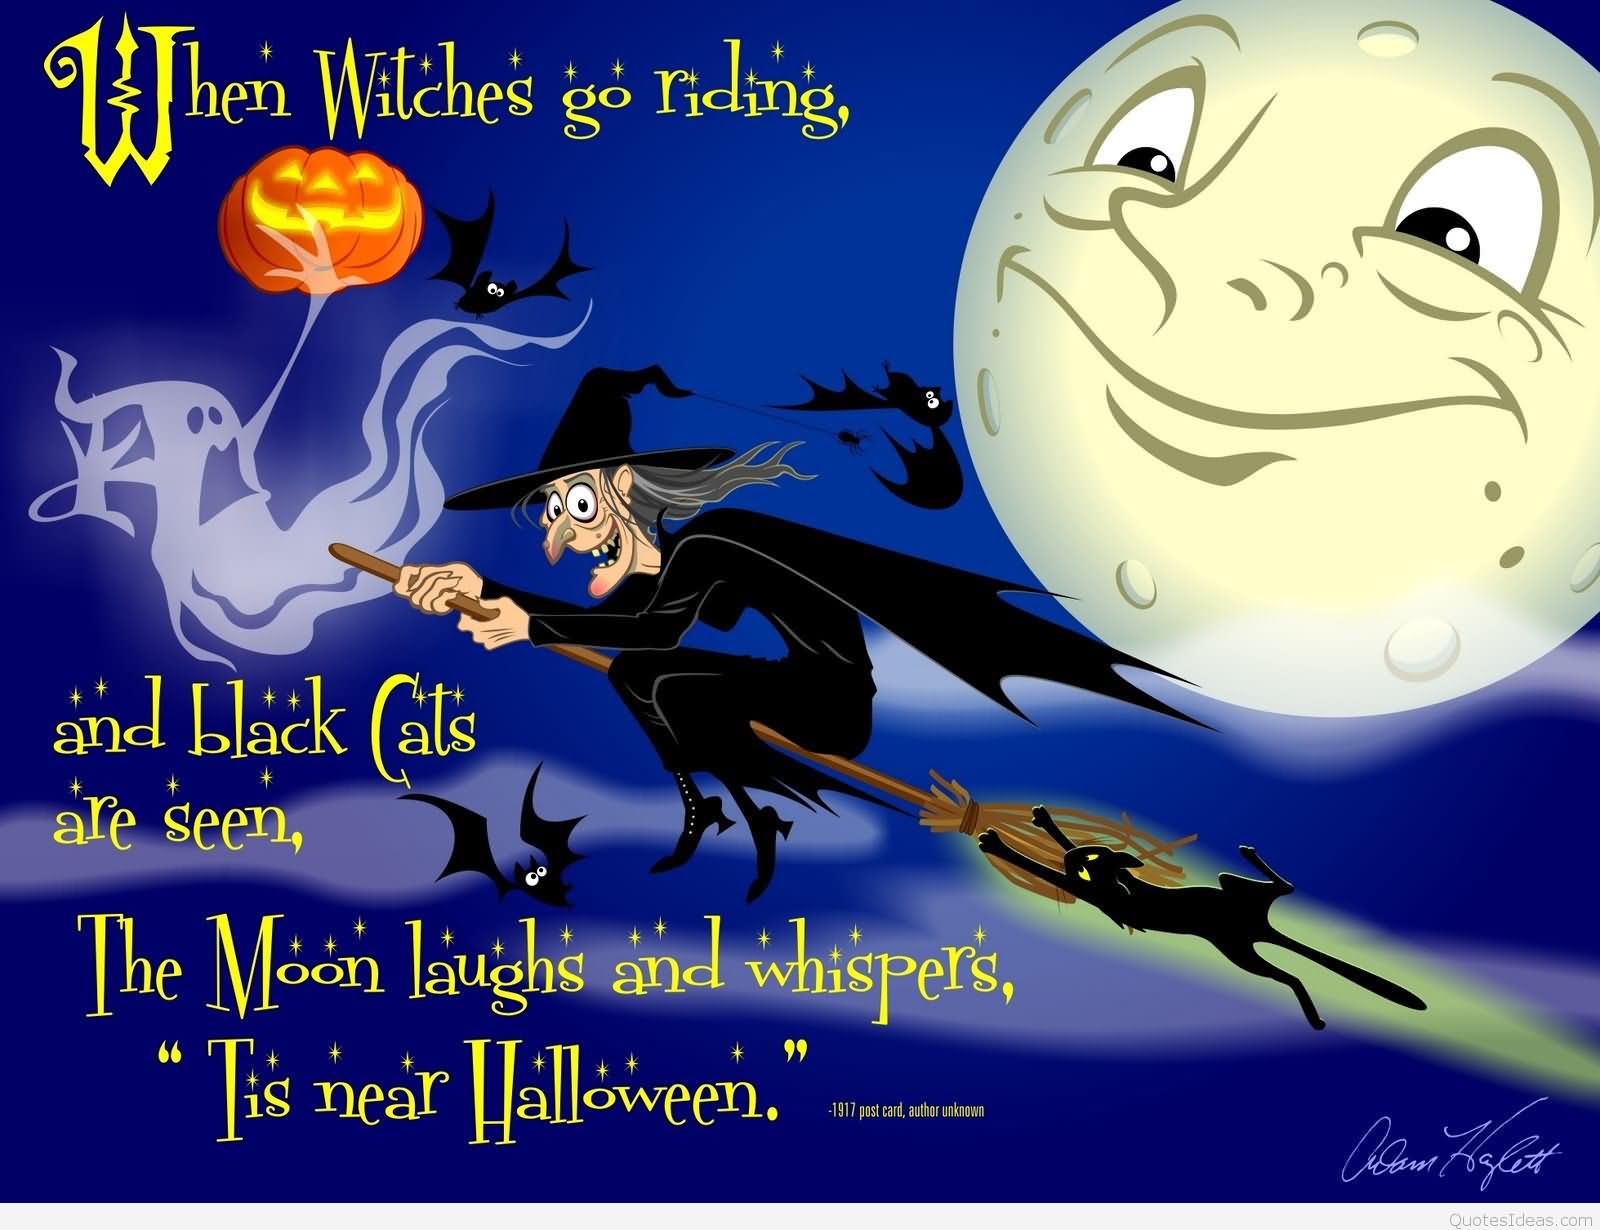 Funny Witches Riding Broom Image For Facebook